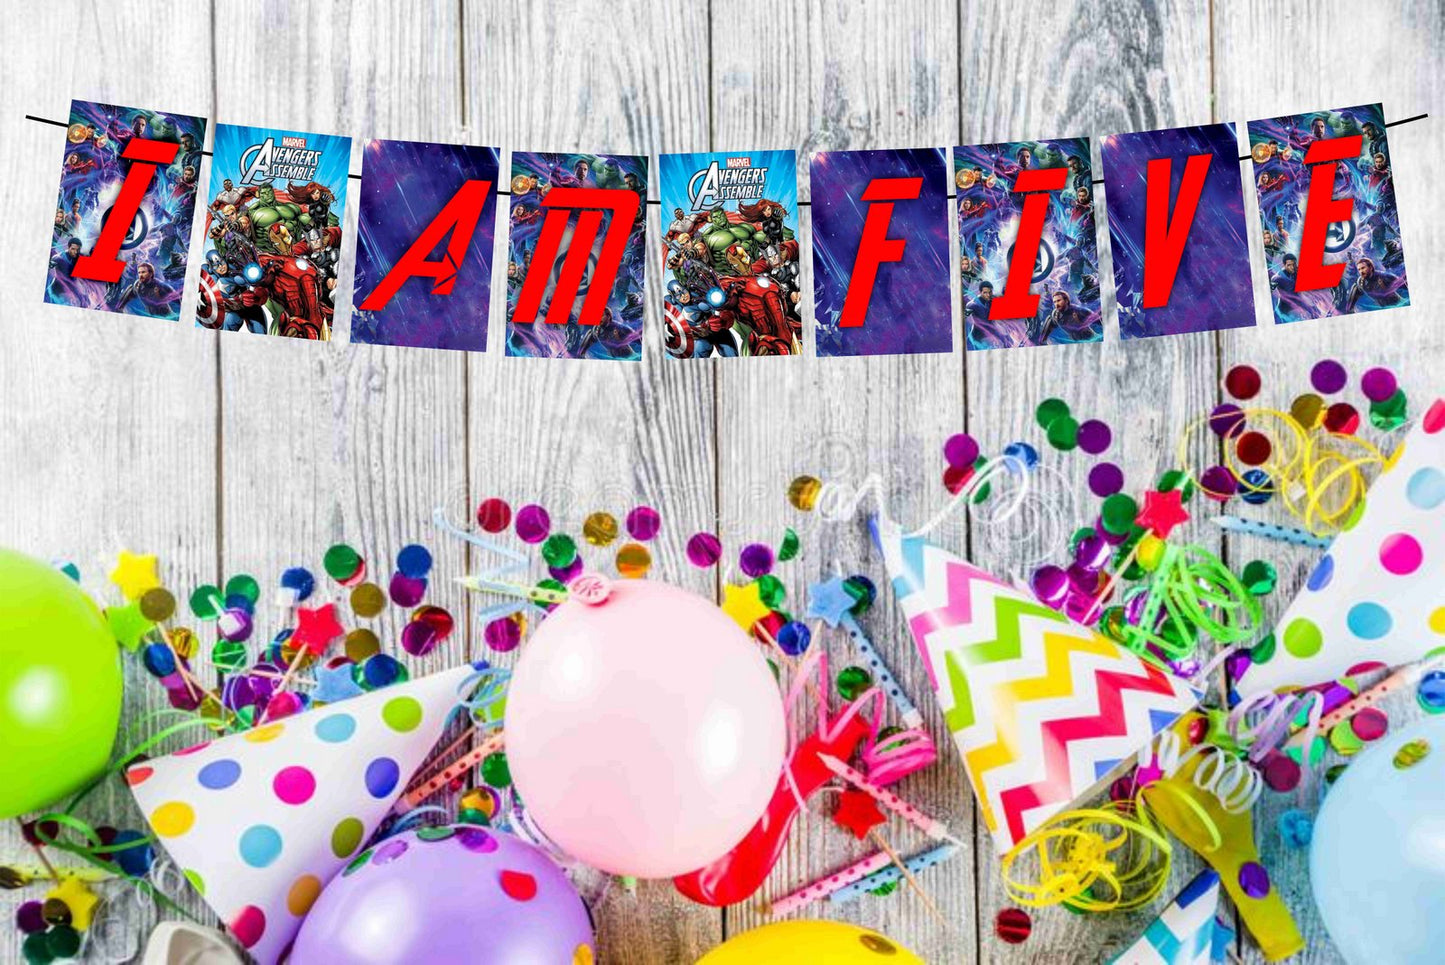 Superhero Theme I Am Five 5th Birthday Banner for Photo Shoot Backdrop and Theme Party